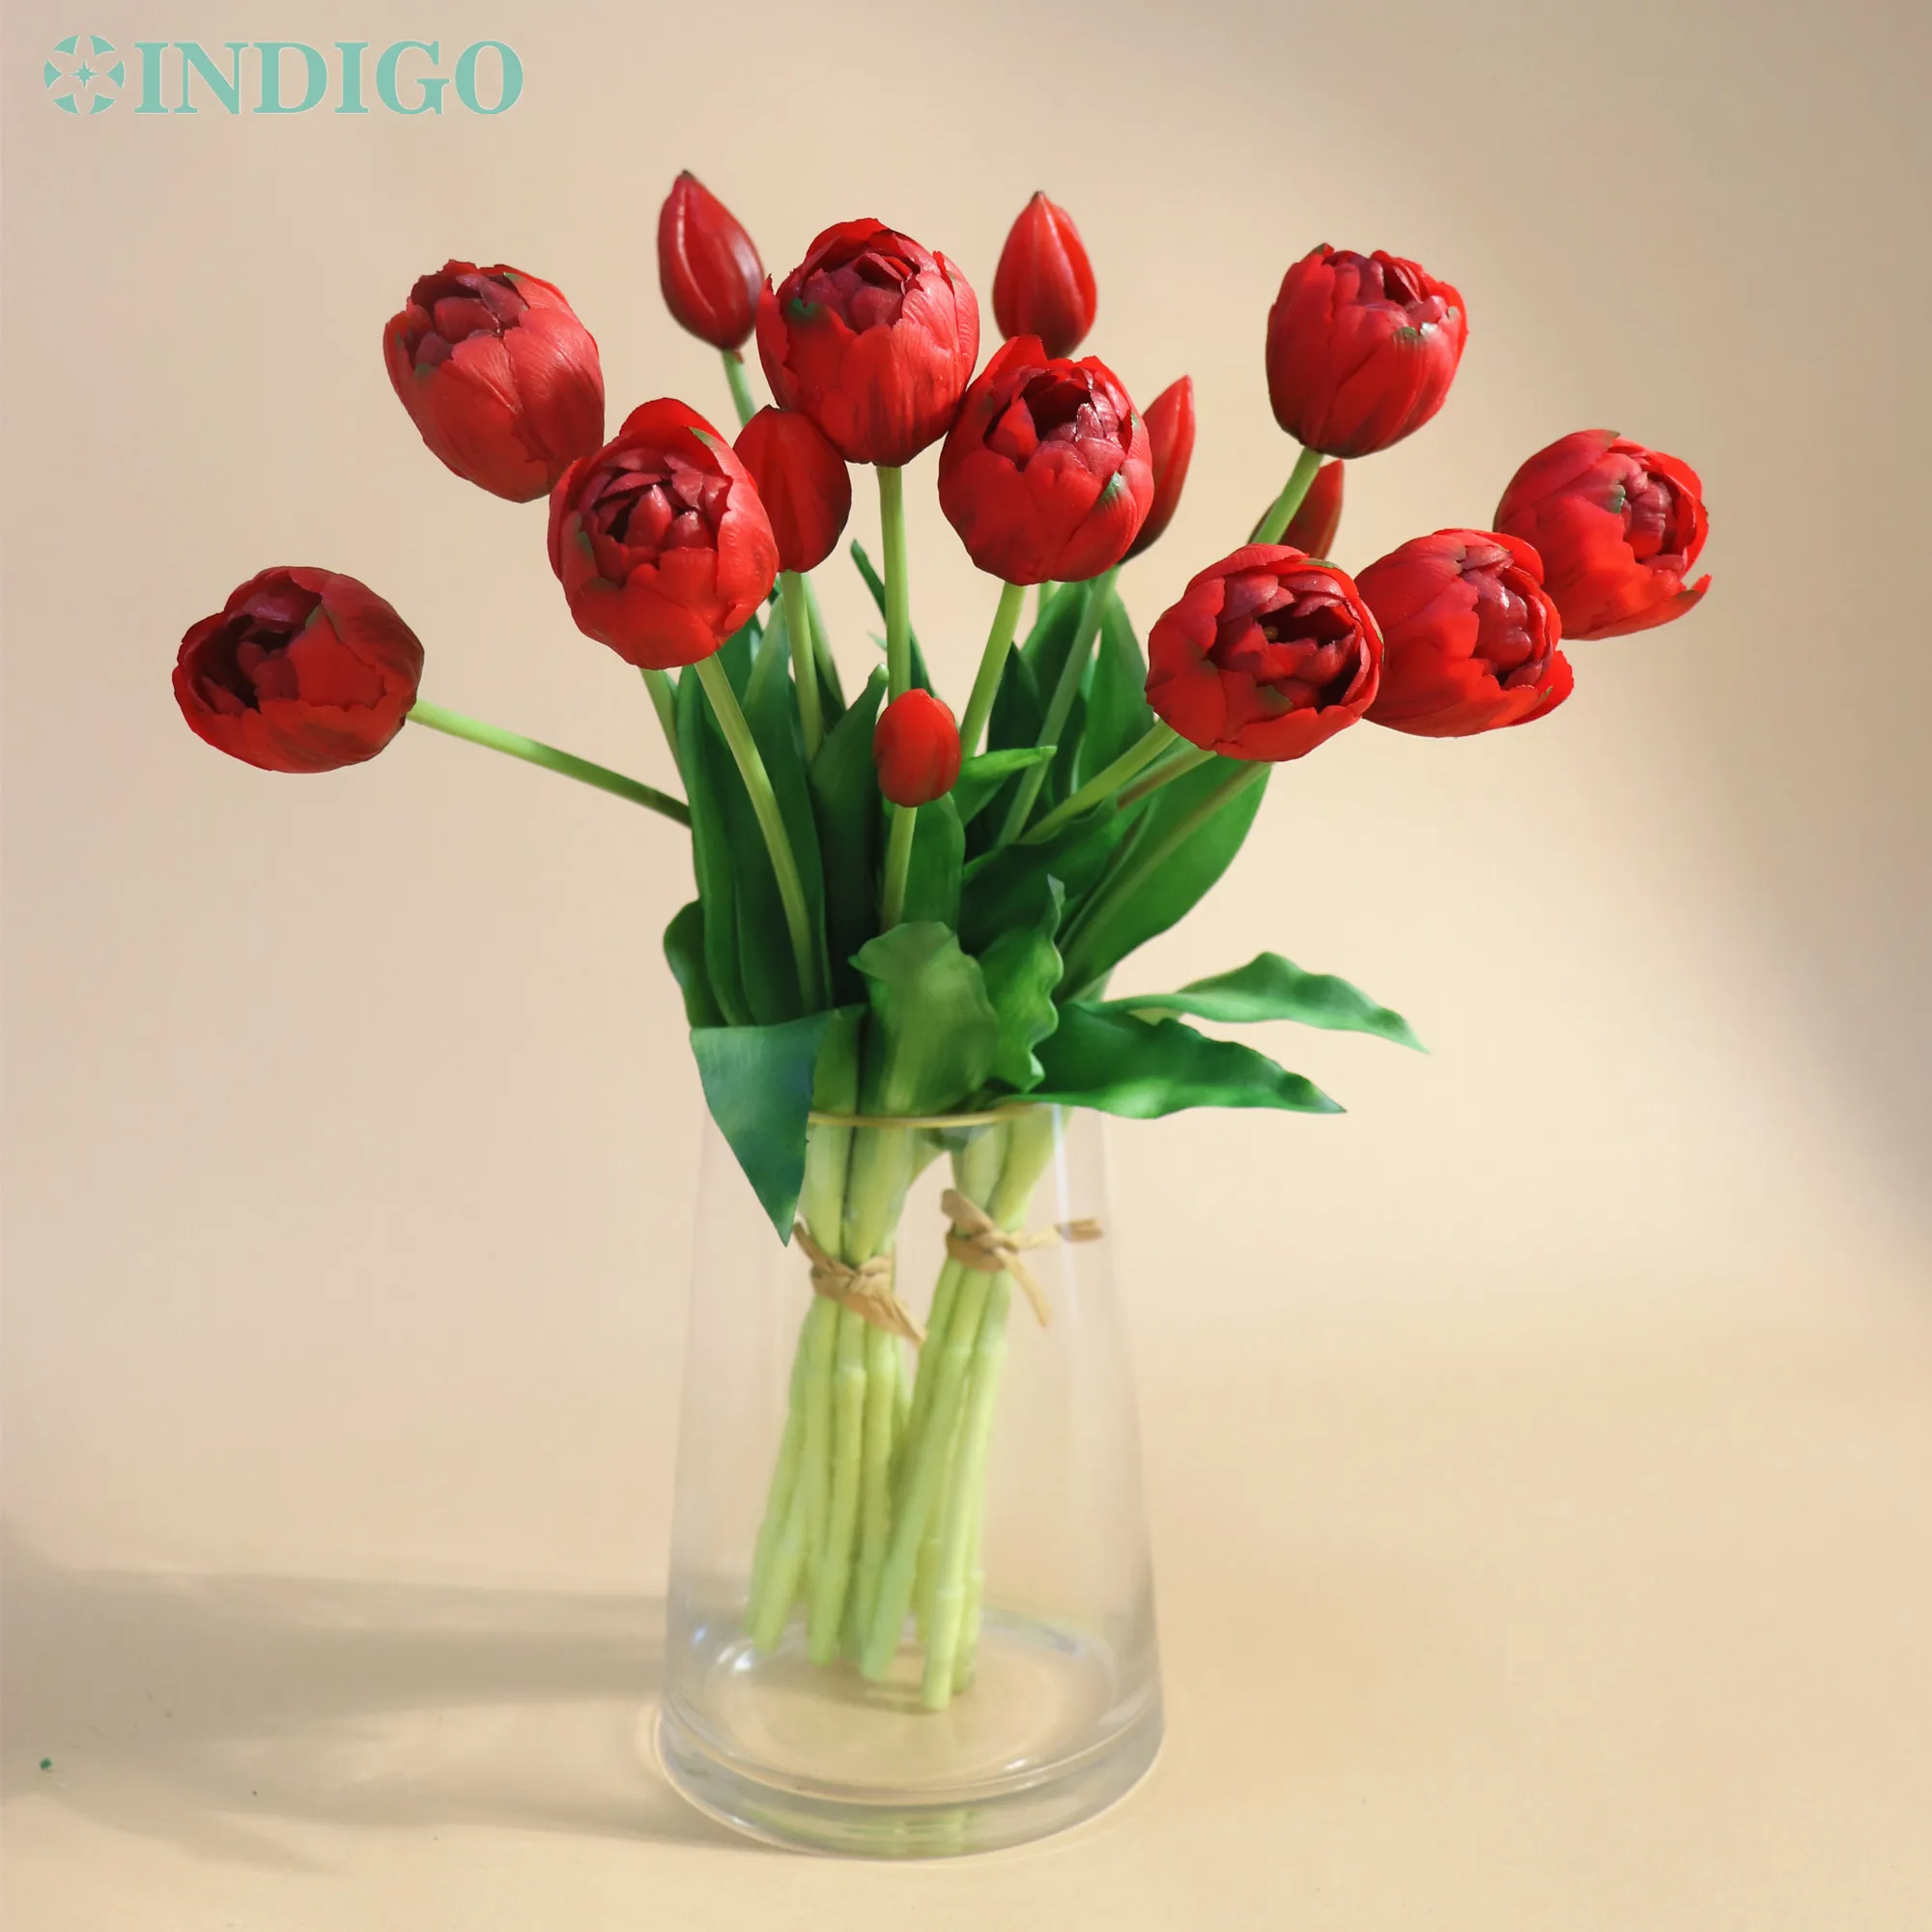 

15PCS Tulip + Buds With Bag Multiple Petals Red Bouquet Real Touch Silicone Home Decor Artificial Flower Mother Gift - INDIGO